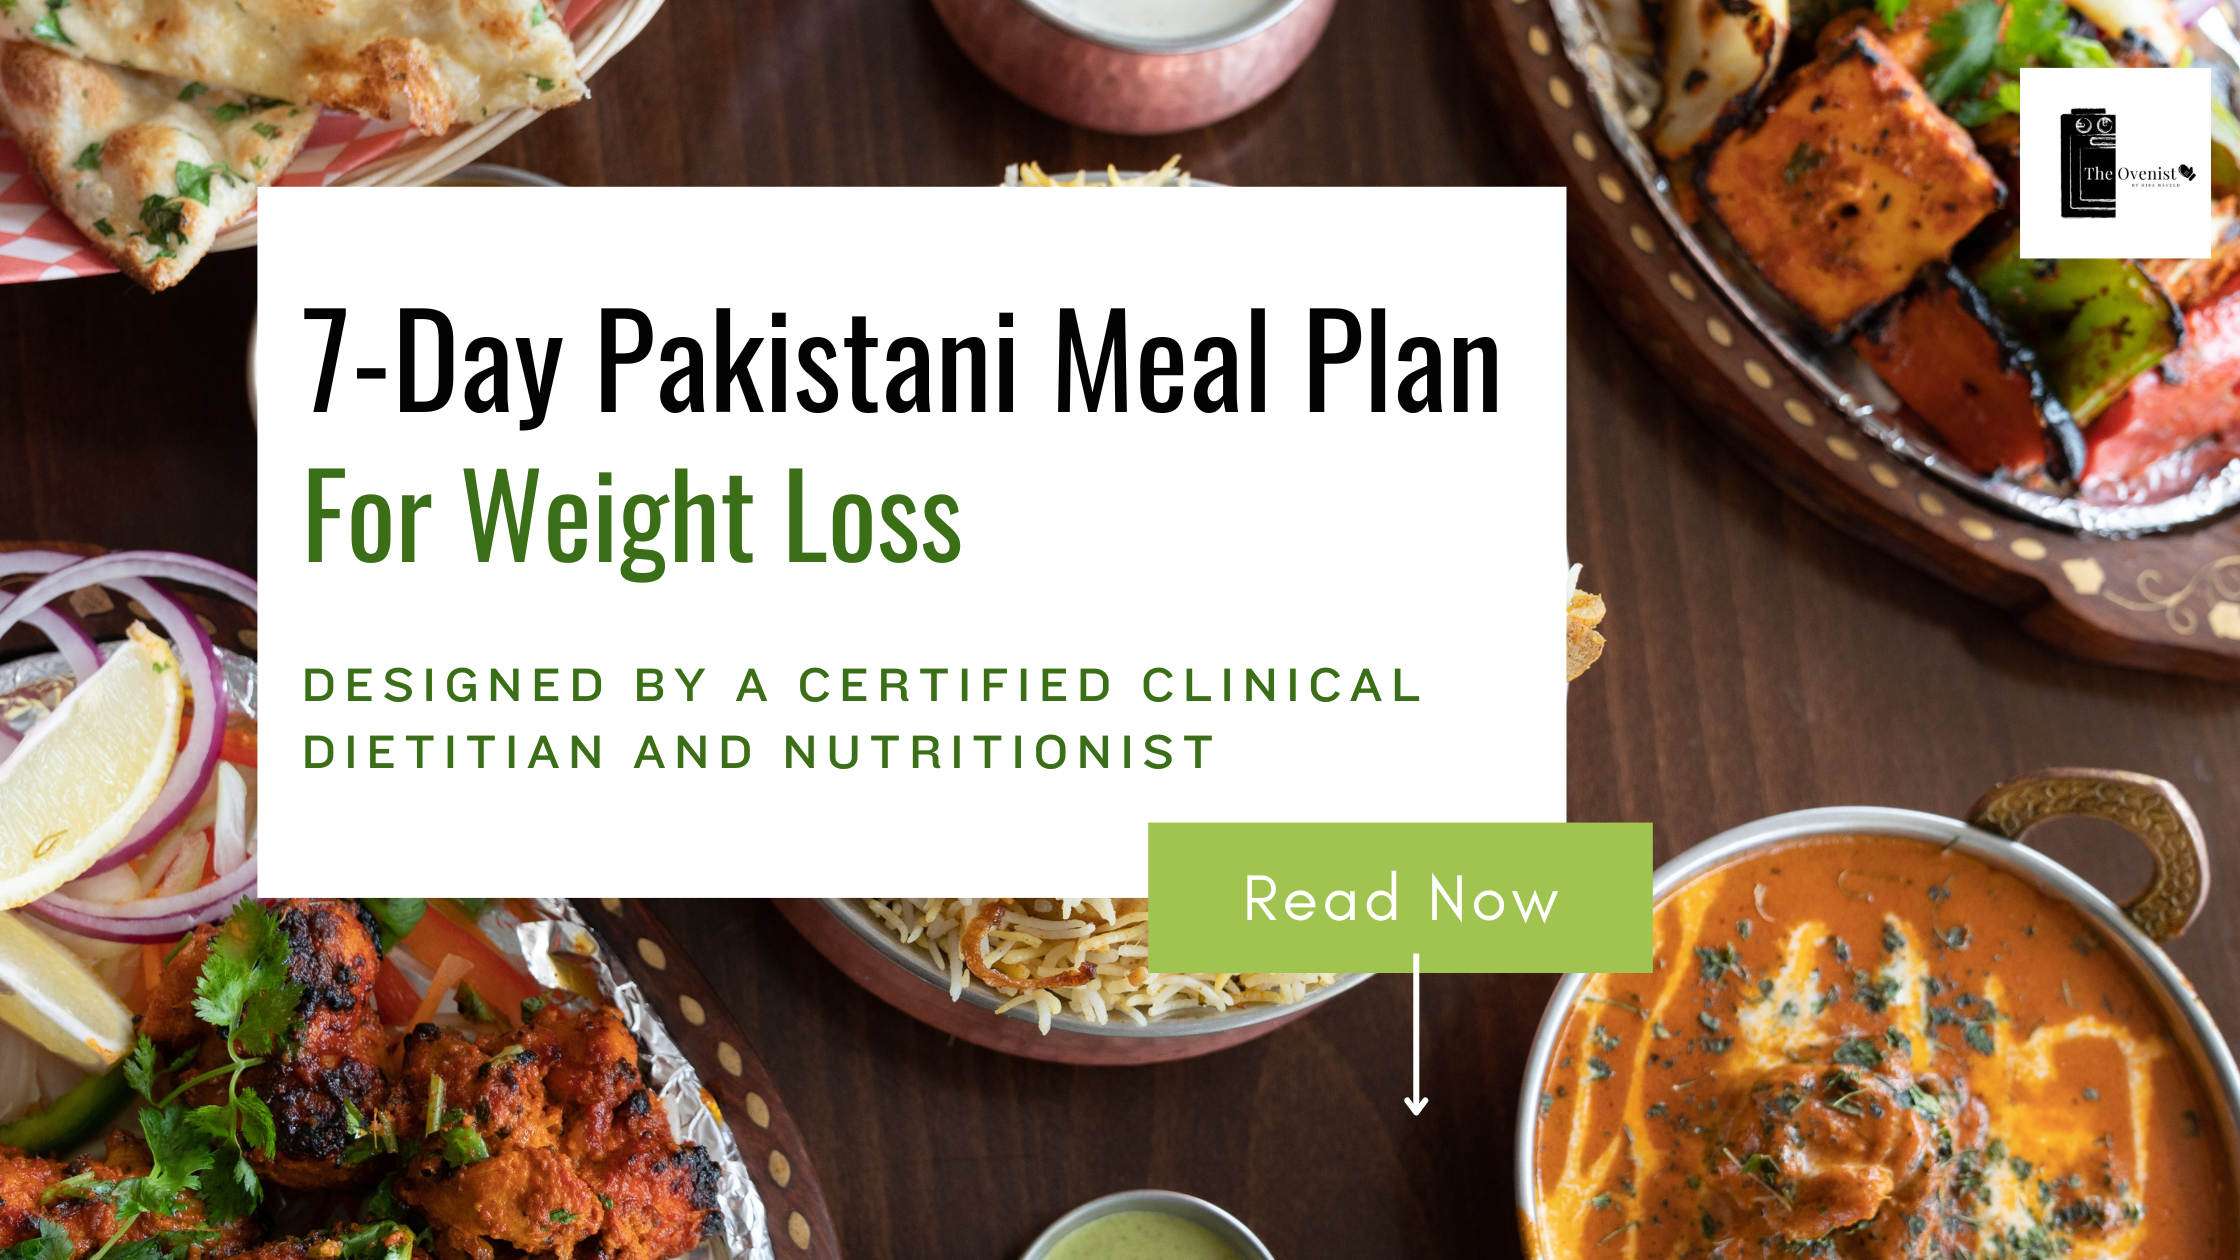 7-Day Pakistani Meal Plan for Weight Loss (Gulf Brands)